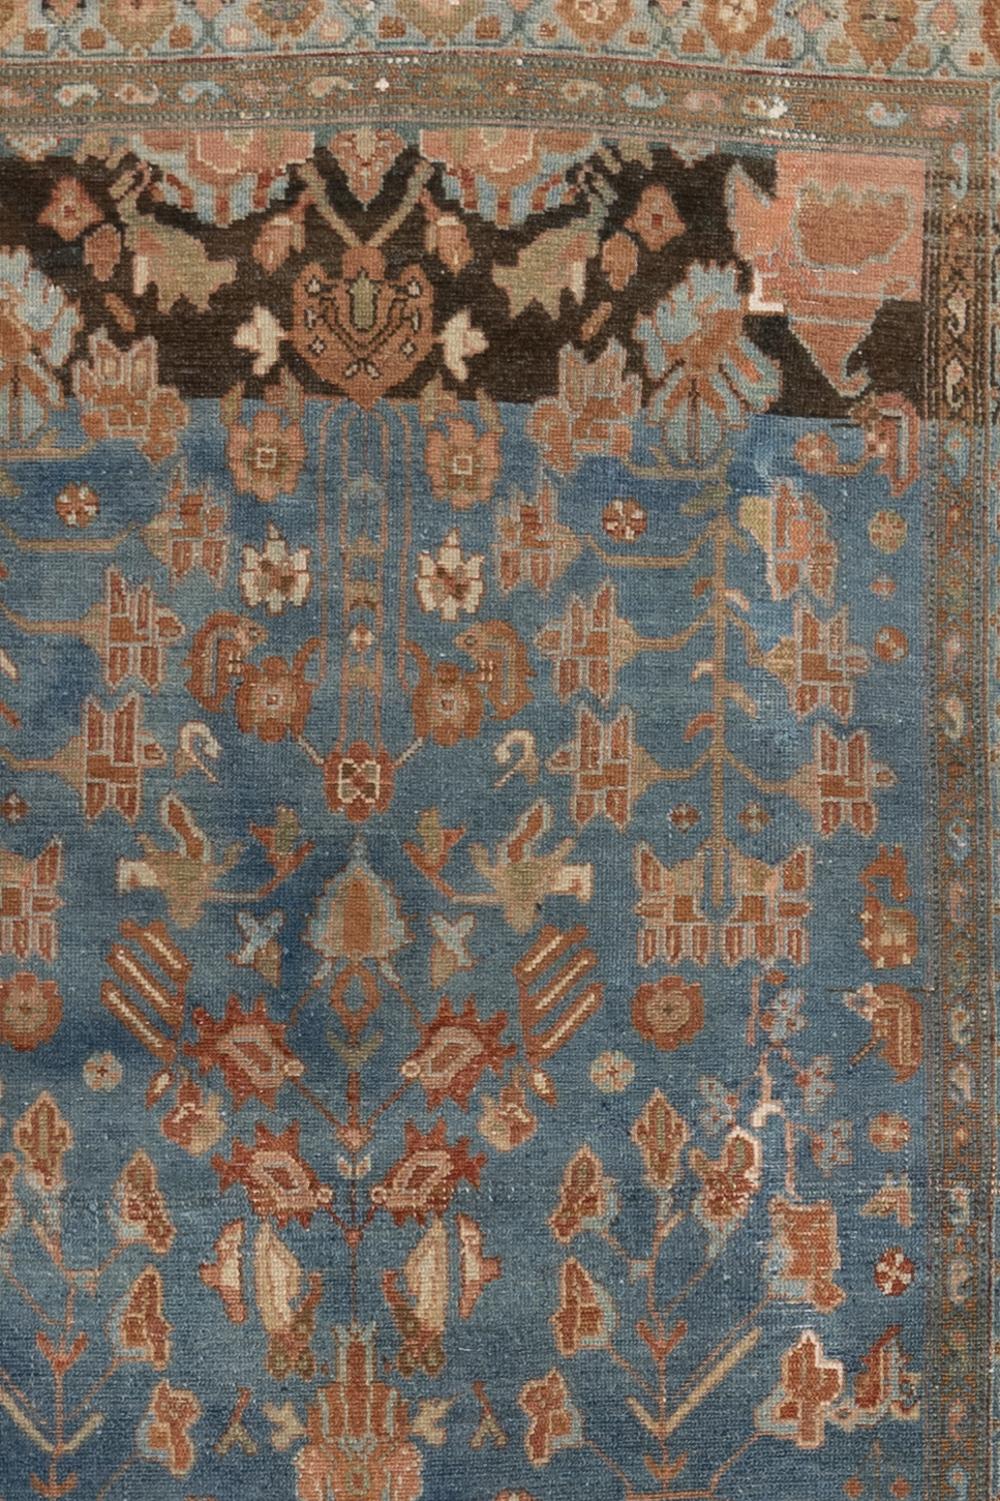 Antique Persian Malayer, 1920's. 

Wear notes: none

Vintage rugs are made by hand over the course of months, sometimes years. Their imperfections and wear are evidence of the hard working human hands that made them and the generations of families